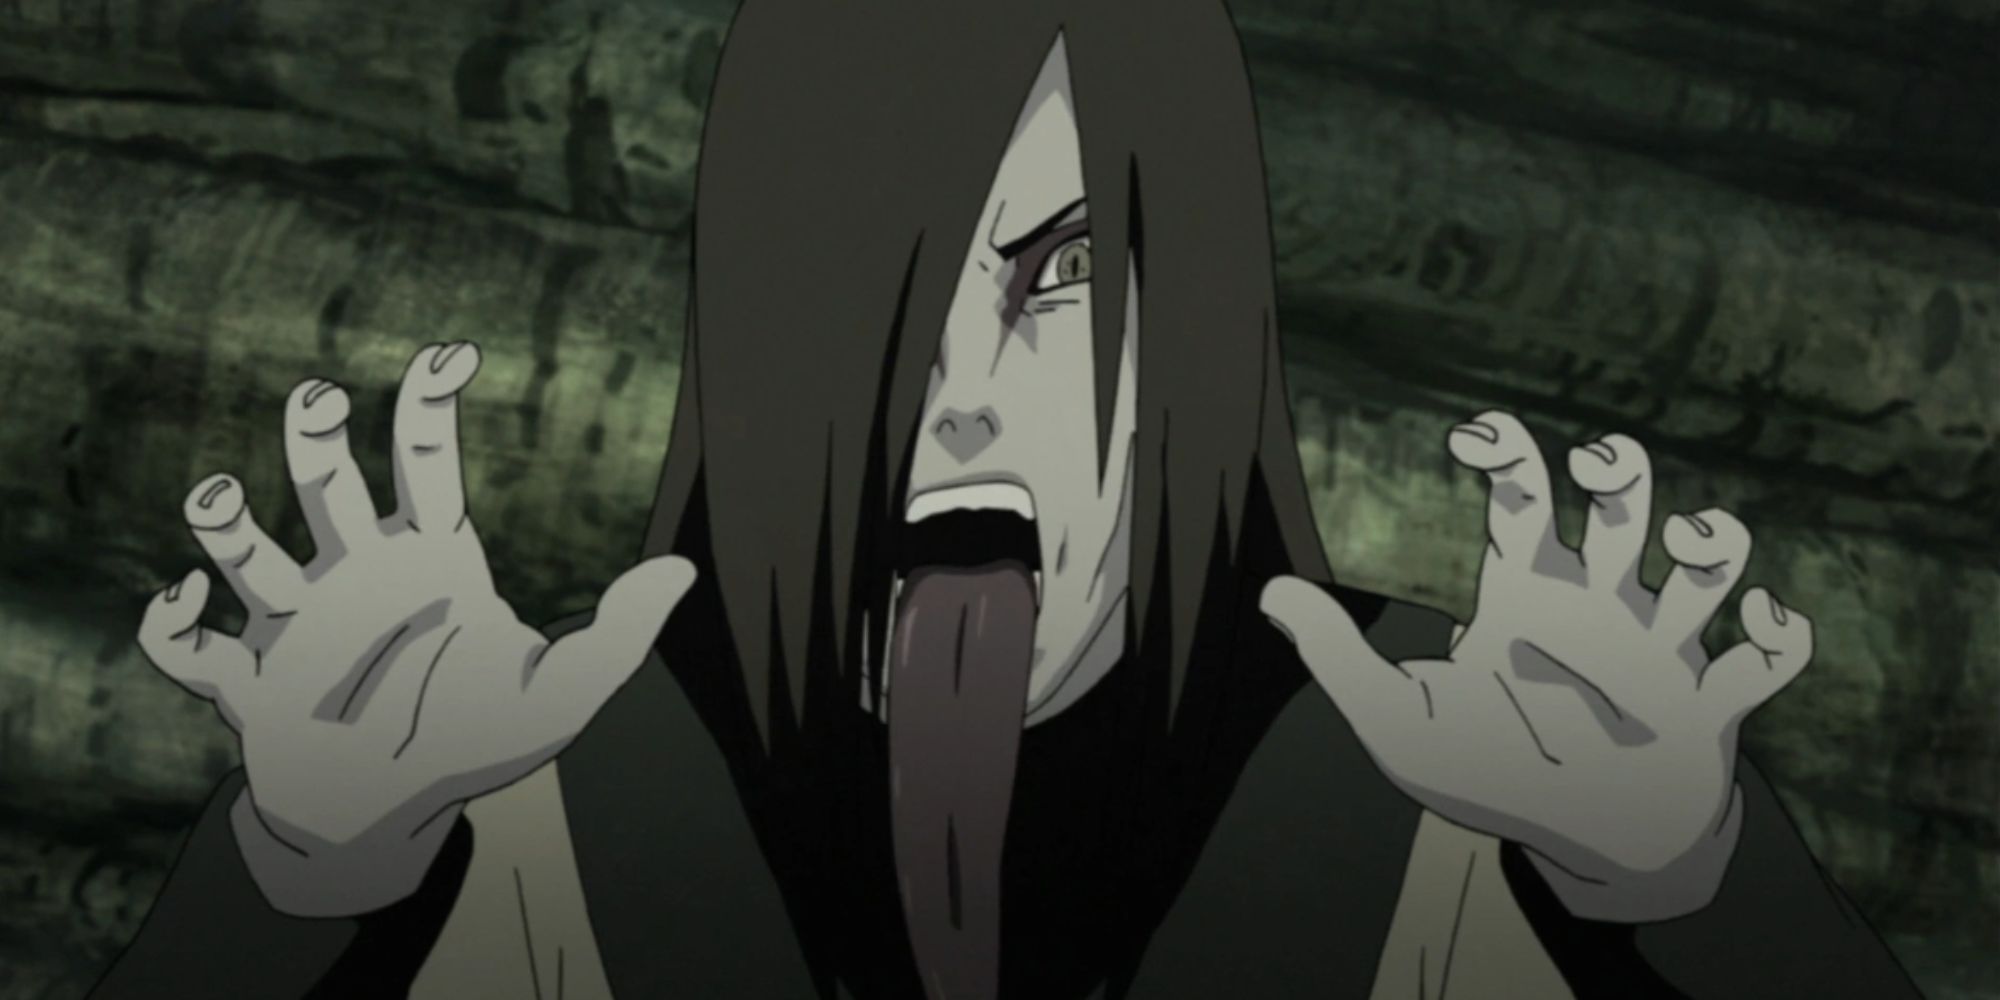 orochimaru holds up his hands with his tongue out